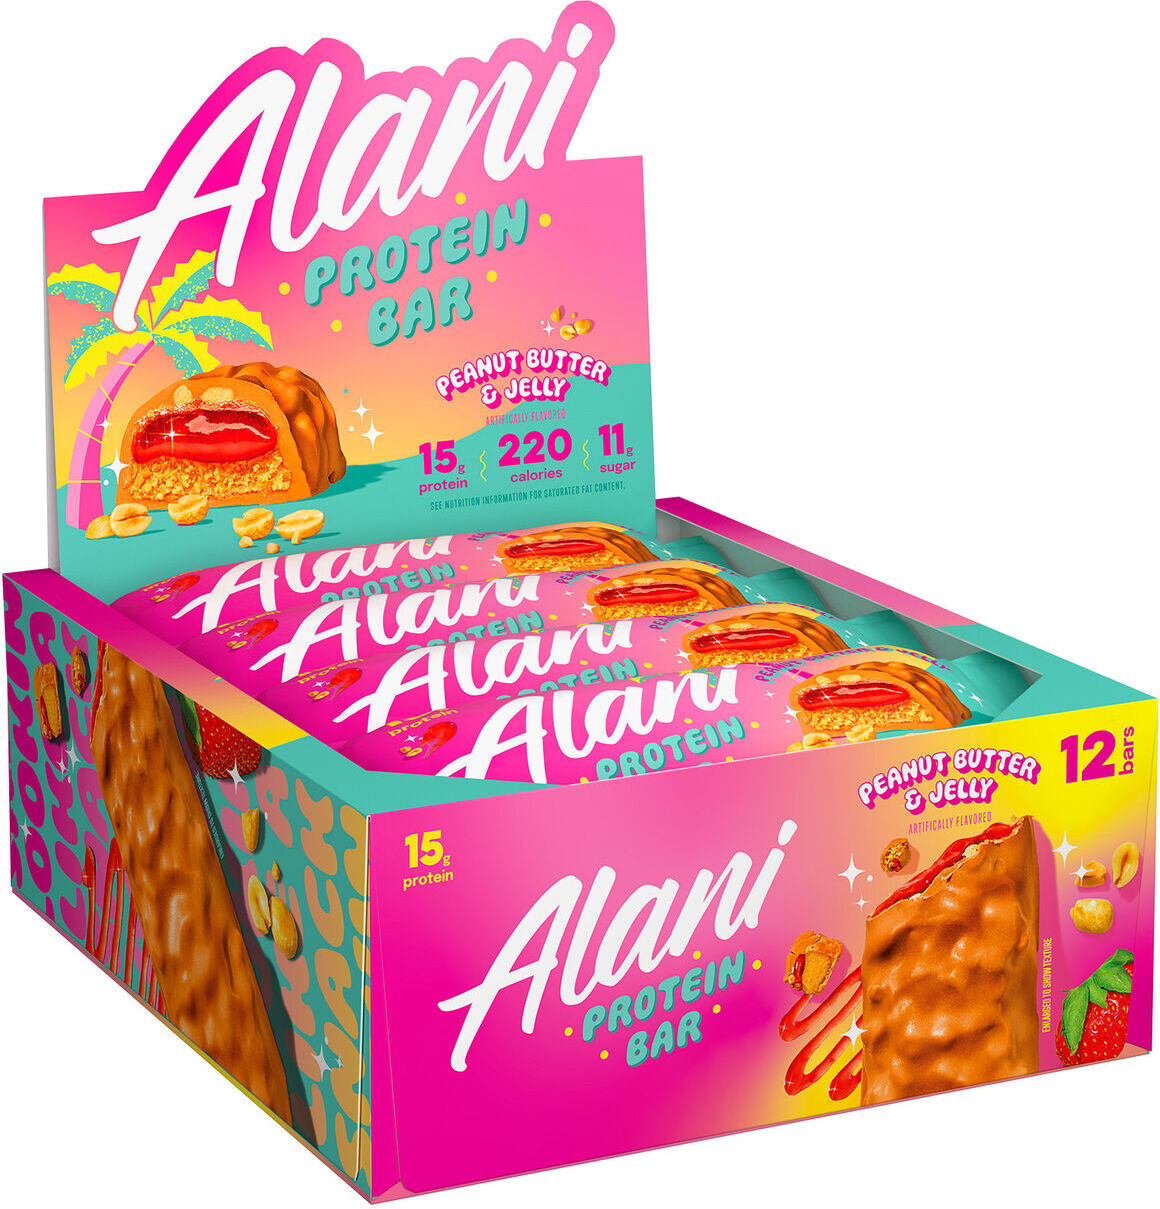 Alani Nu Fit Snacks Protein Bar News & Prices at PricePlow